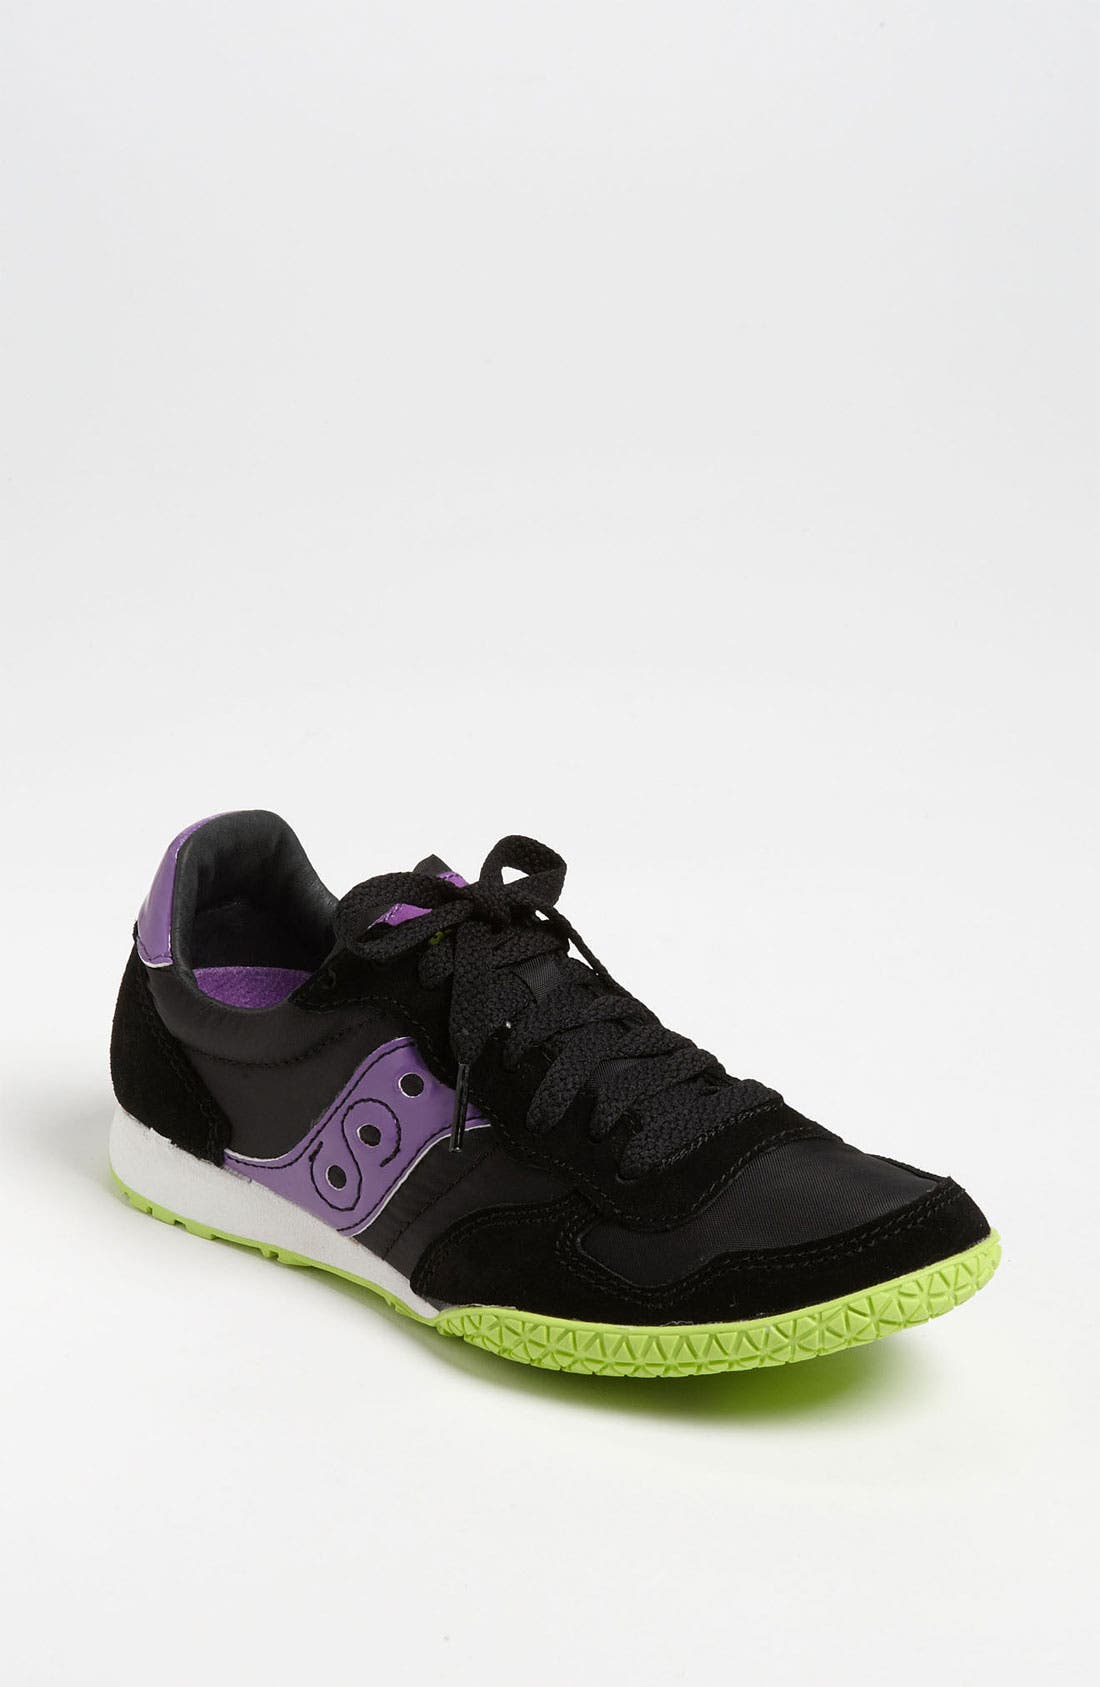 nordstrom saucony shoes